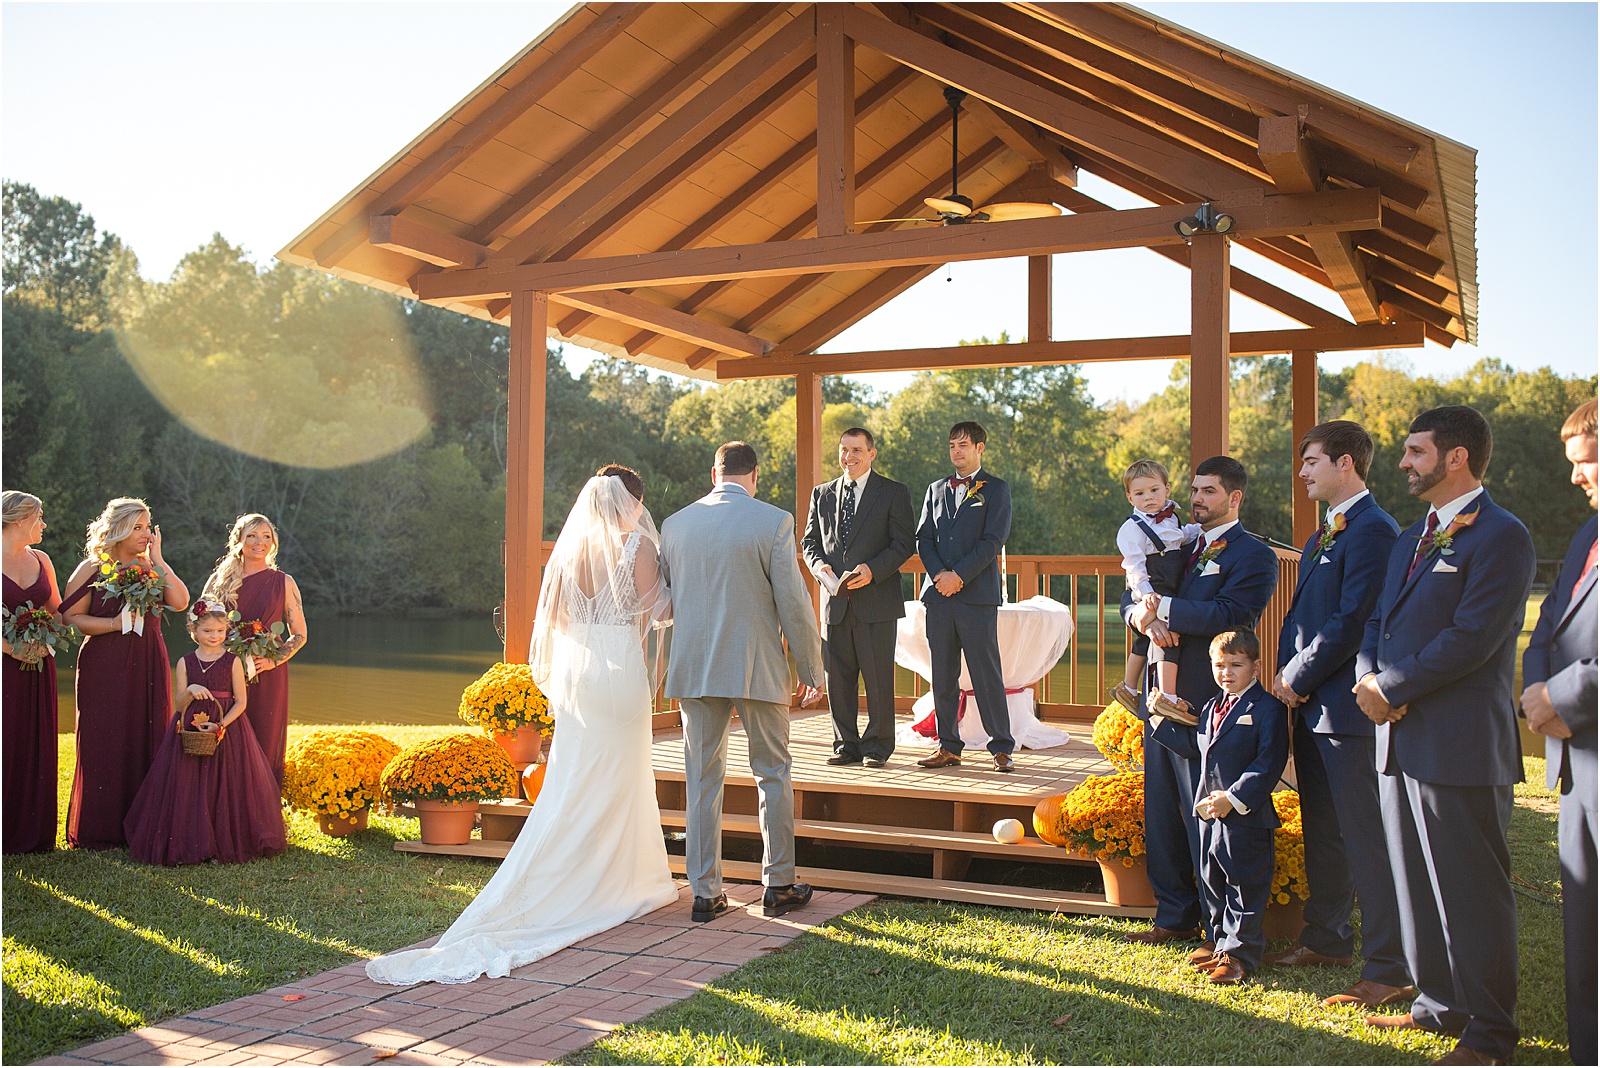 Father of the bride gives away bride to groom in outdoor ceremony